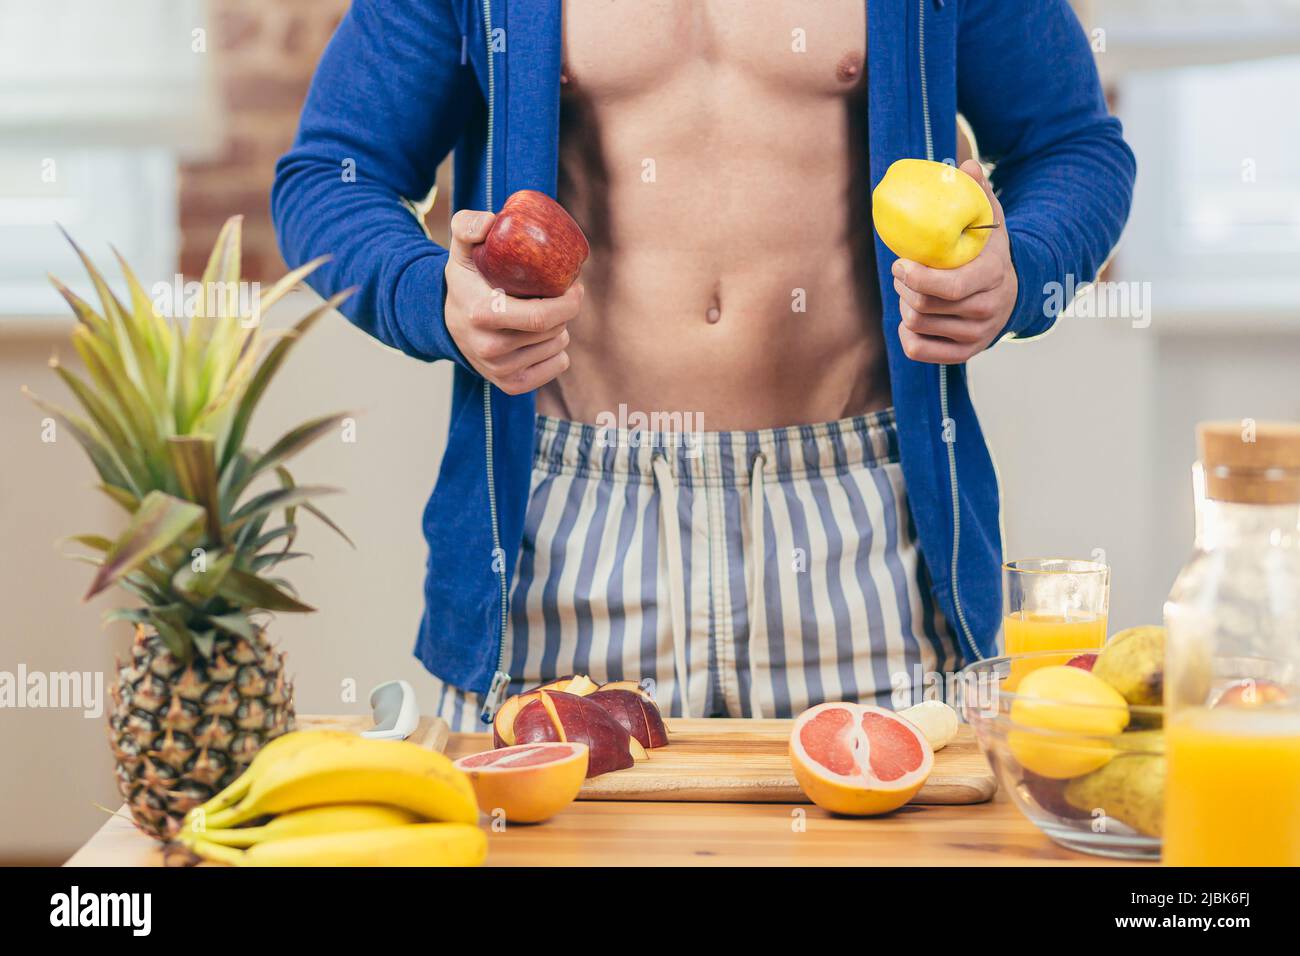 Close up photo, part of body, Male athlete preparing fruit salad and fresh juice at home in the kitchen, showing Stock Photo